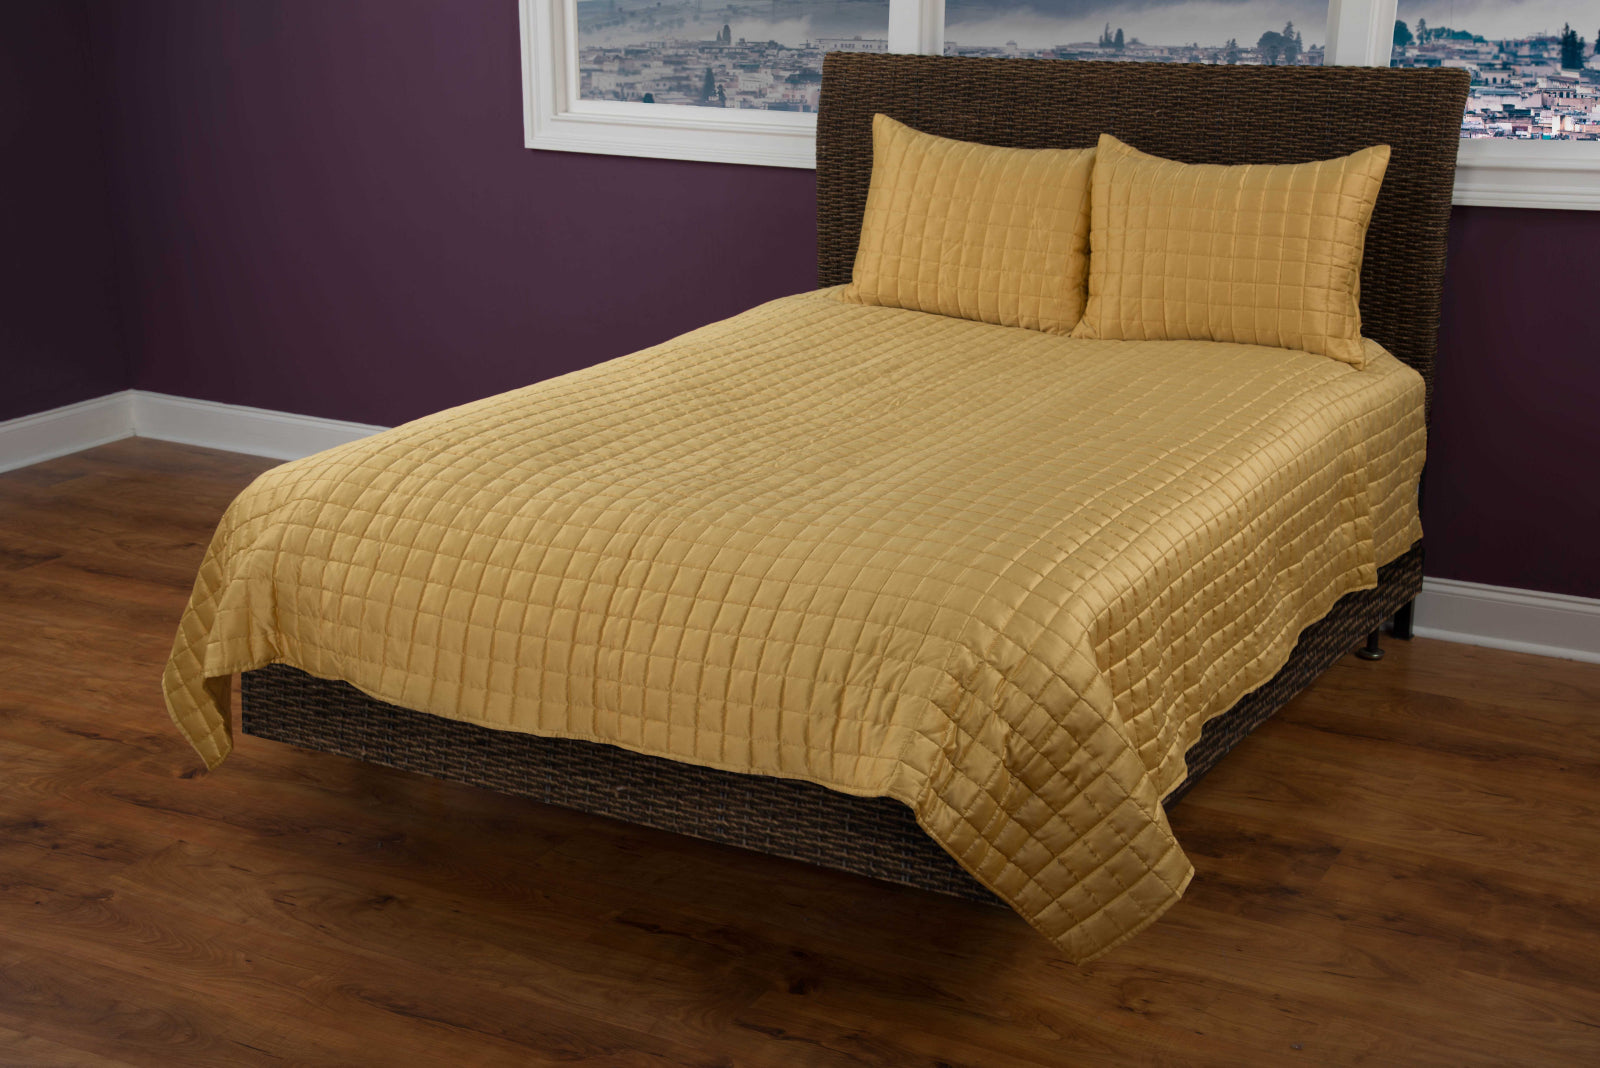 Rizzy BT1825 Satinology Gold Bedding main image